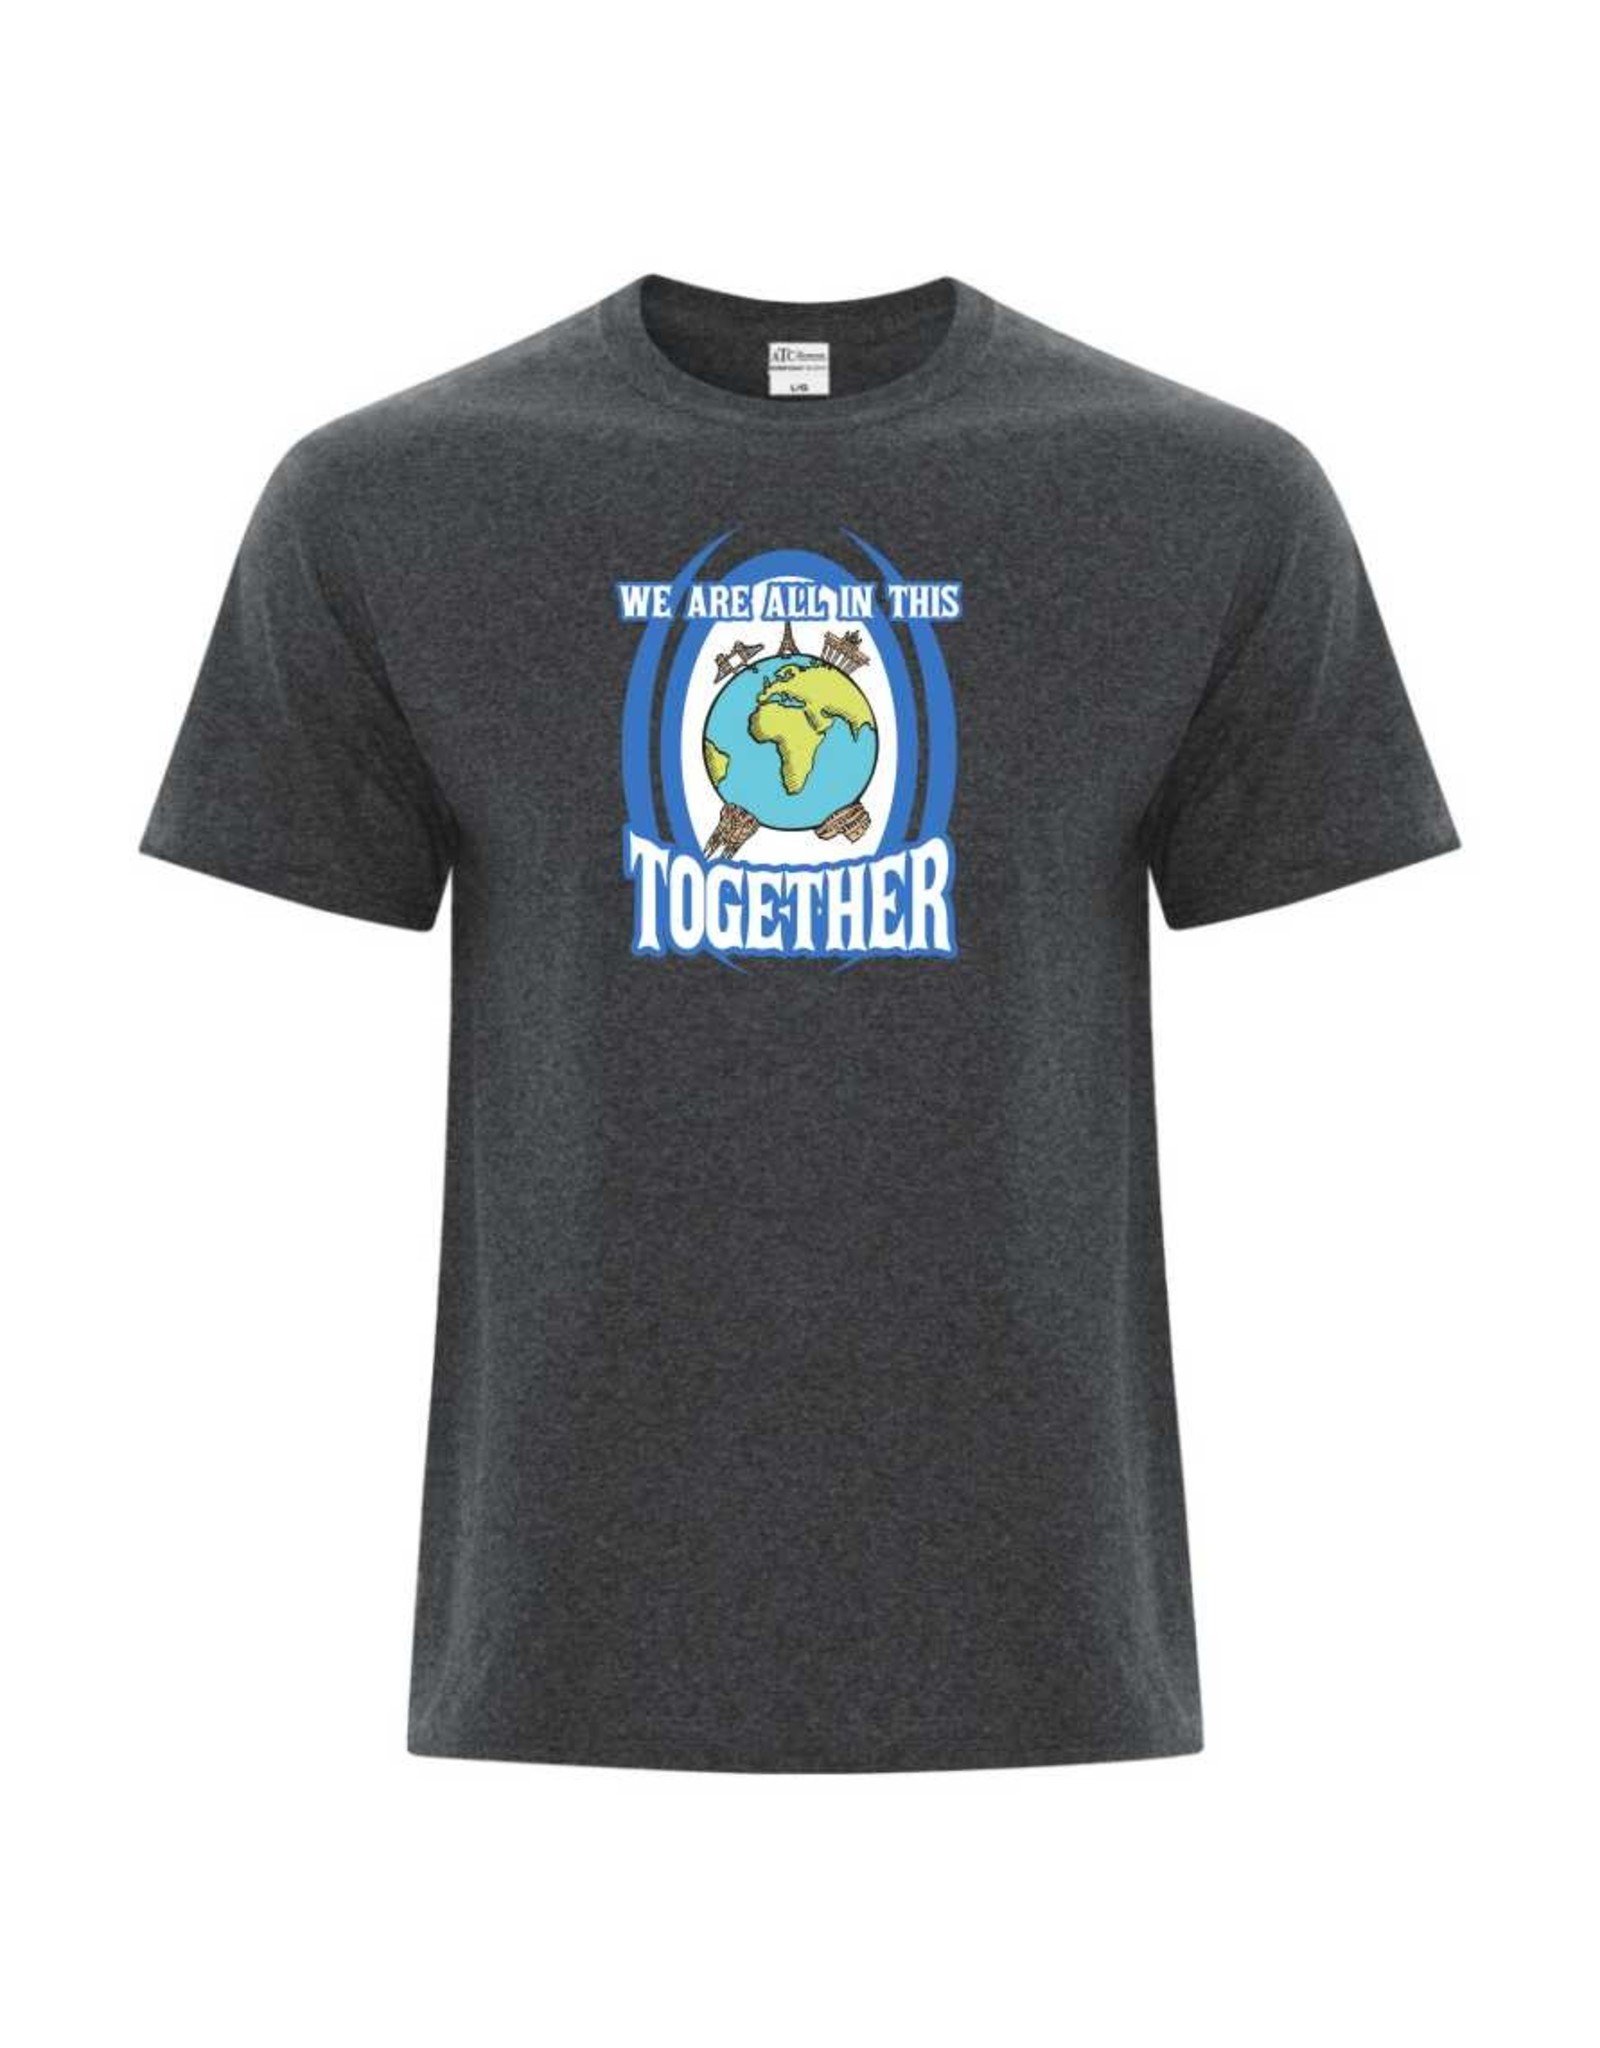 We are all in this together T-Shirt